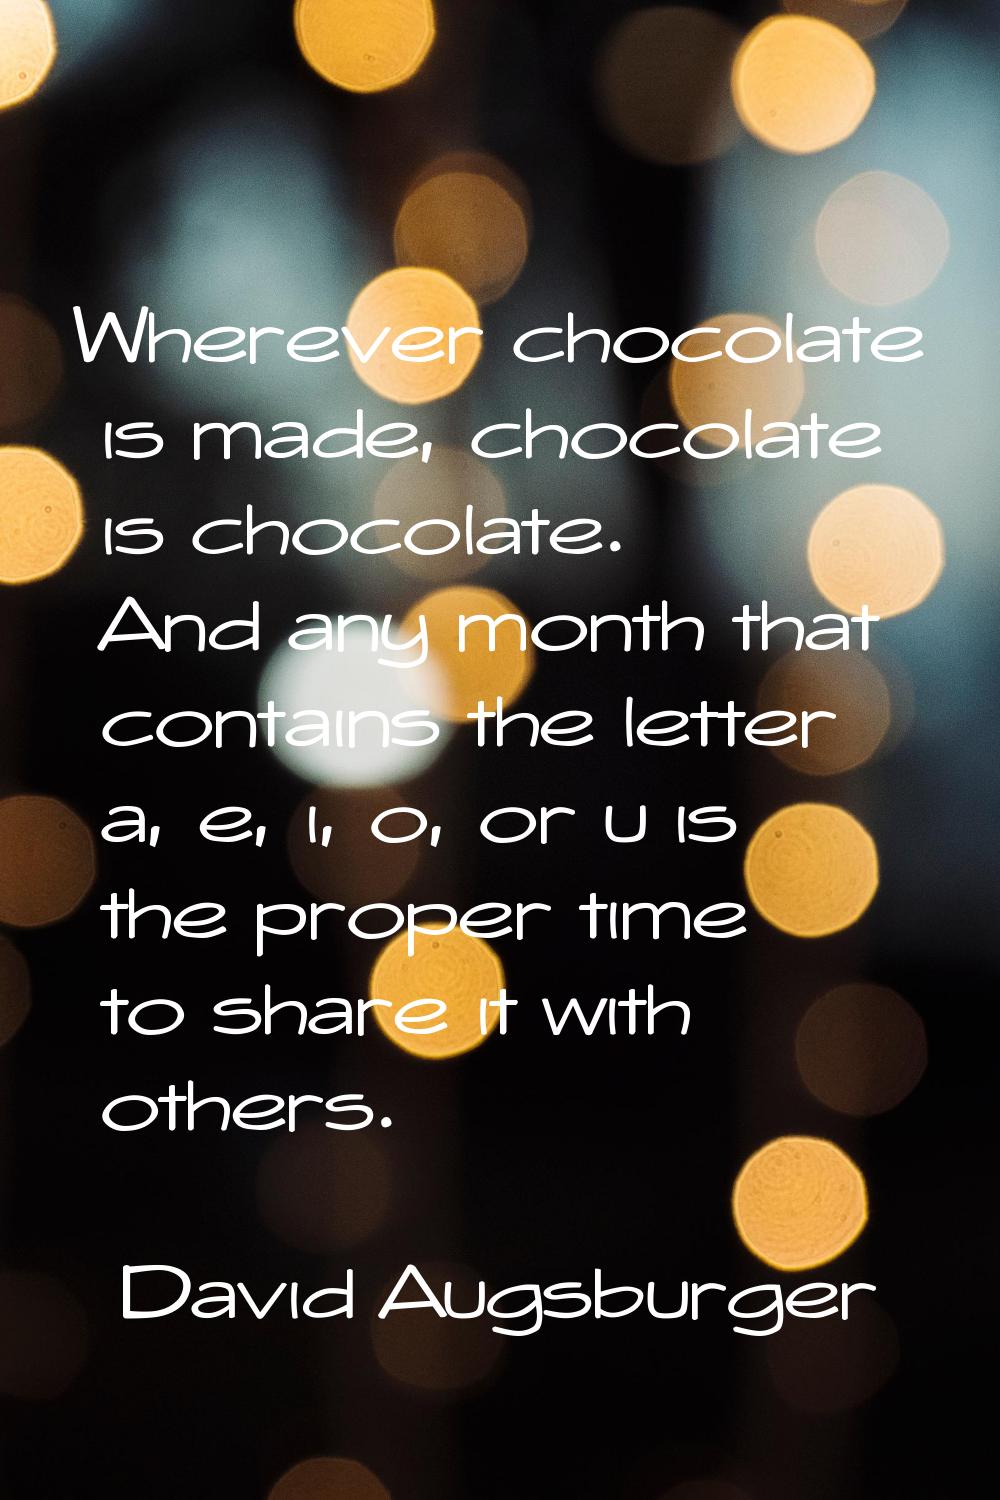 Wherever chocolate is made, chocolate is chocolate. And any month that contains the letter a, e, i,